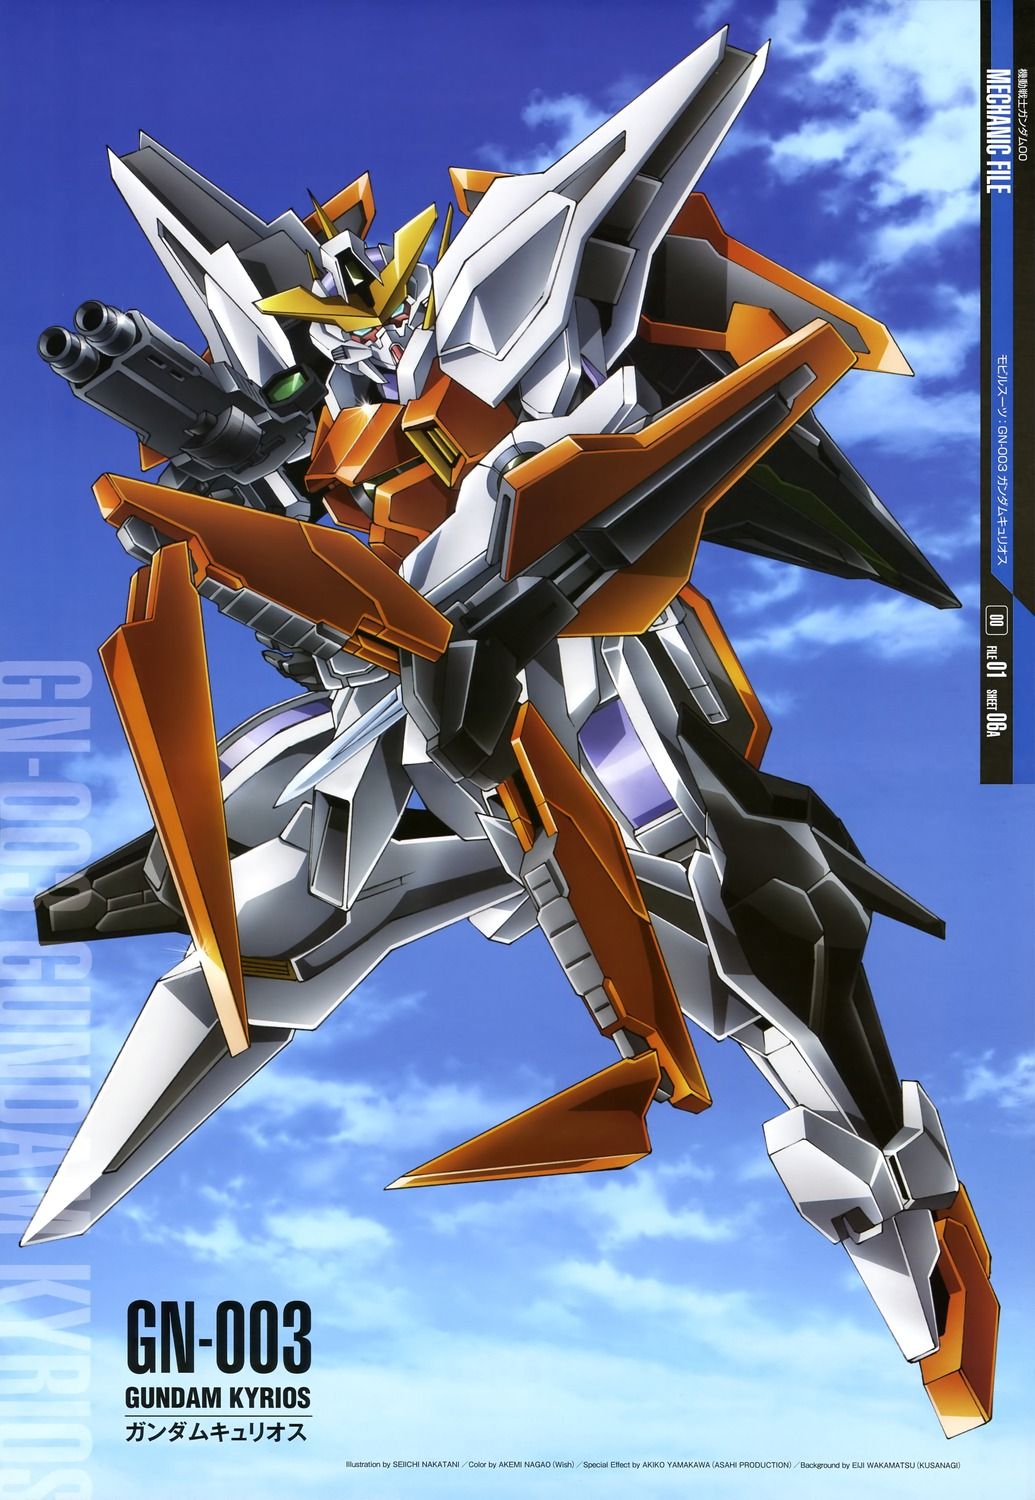 Kyrios Wallpaper. Kyrios Wallpaper, Gundam Kyrios Wallpaper and